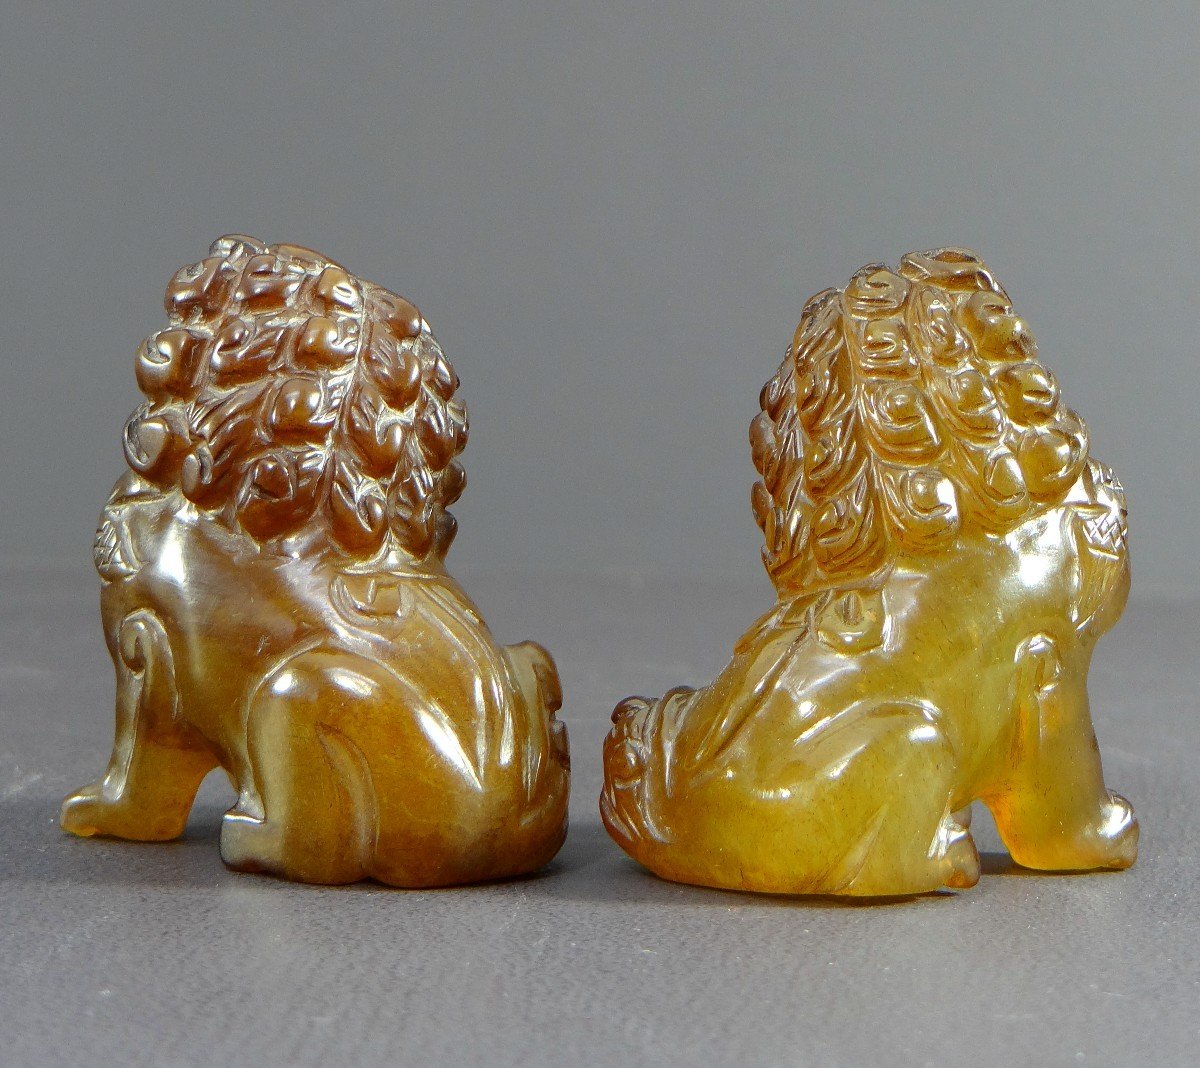 China, Mid-20th Century, Pair Of Fo Dogs In Hard Stone In The Spirit Of Agate.-photo-1